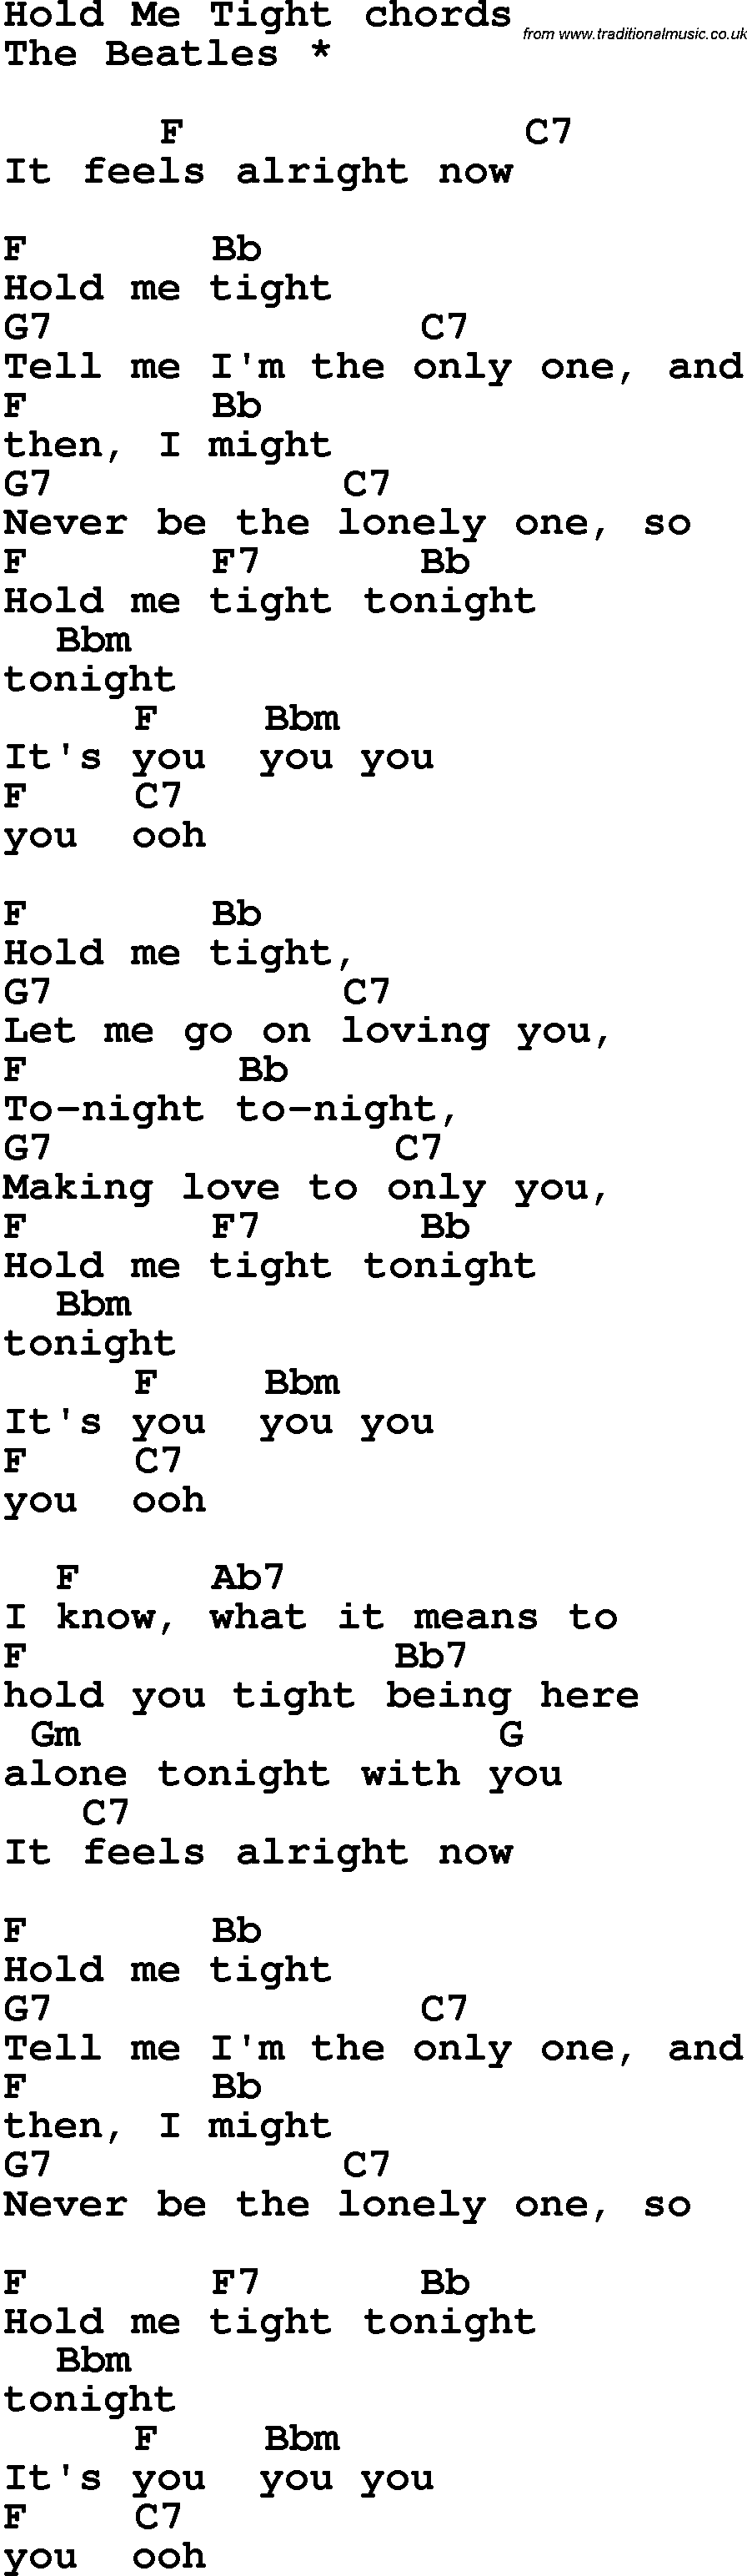 Song Lyrics with guitar chords for Hold Me Tight - The Beatles